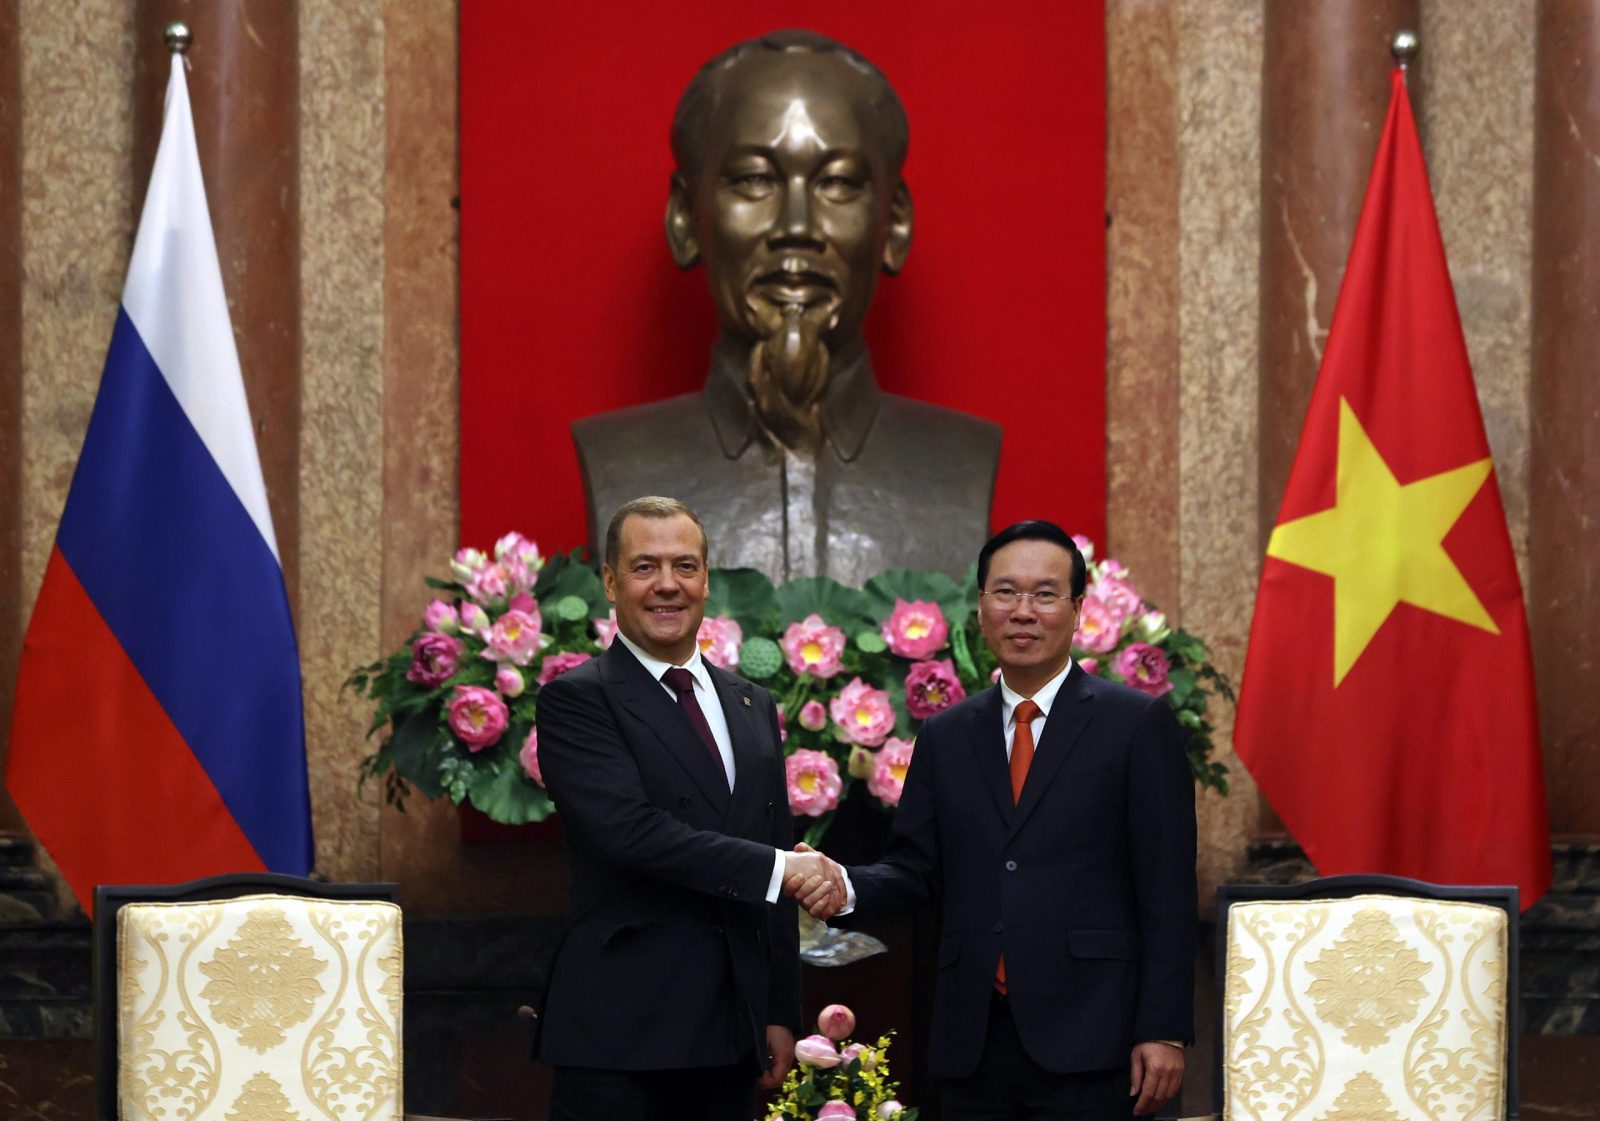 epa10645796 Deputy chairman of Russia's Security Council Dmitry Medvedev (L) and Vietnam's president Vo Van Thuong shake hands during their meeting, in Hanoi, Vietnam, 22 May 2023. Dmitry Medvedev arrived in Vietnam on a two-day working visit, he will hold talks with the country's leadership. Since December 2022, Dmitry Medvedev has been First Deputy President of the Military Industrial Commission. The commission organizes and coordinates the activities of federal departments on issues of state policy in the field of the military-industrial complex.  EPA/EKATERINA SHTUKINA / SPUTNIK / GOVERNMENT PRESS SERVICE POOL MANDATORY CREDIT